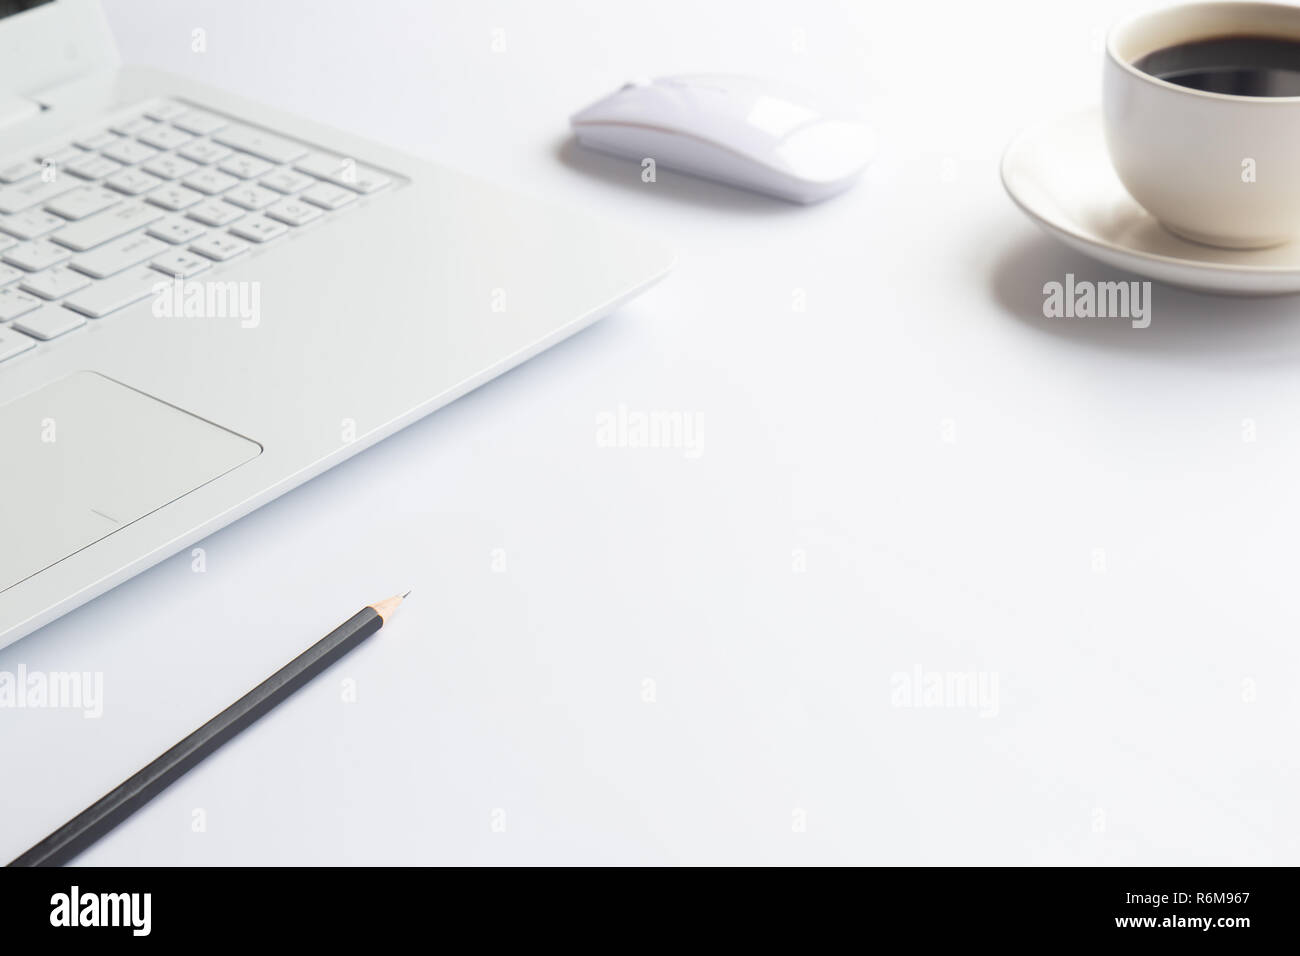 White desk office with laptop, smartphone and other work supplies with cup of coffee. Top view with copy space for input the text. Designer workspace  Stock Photo